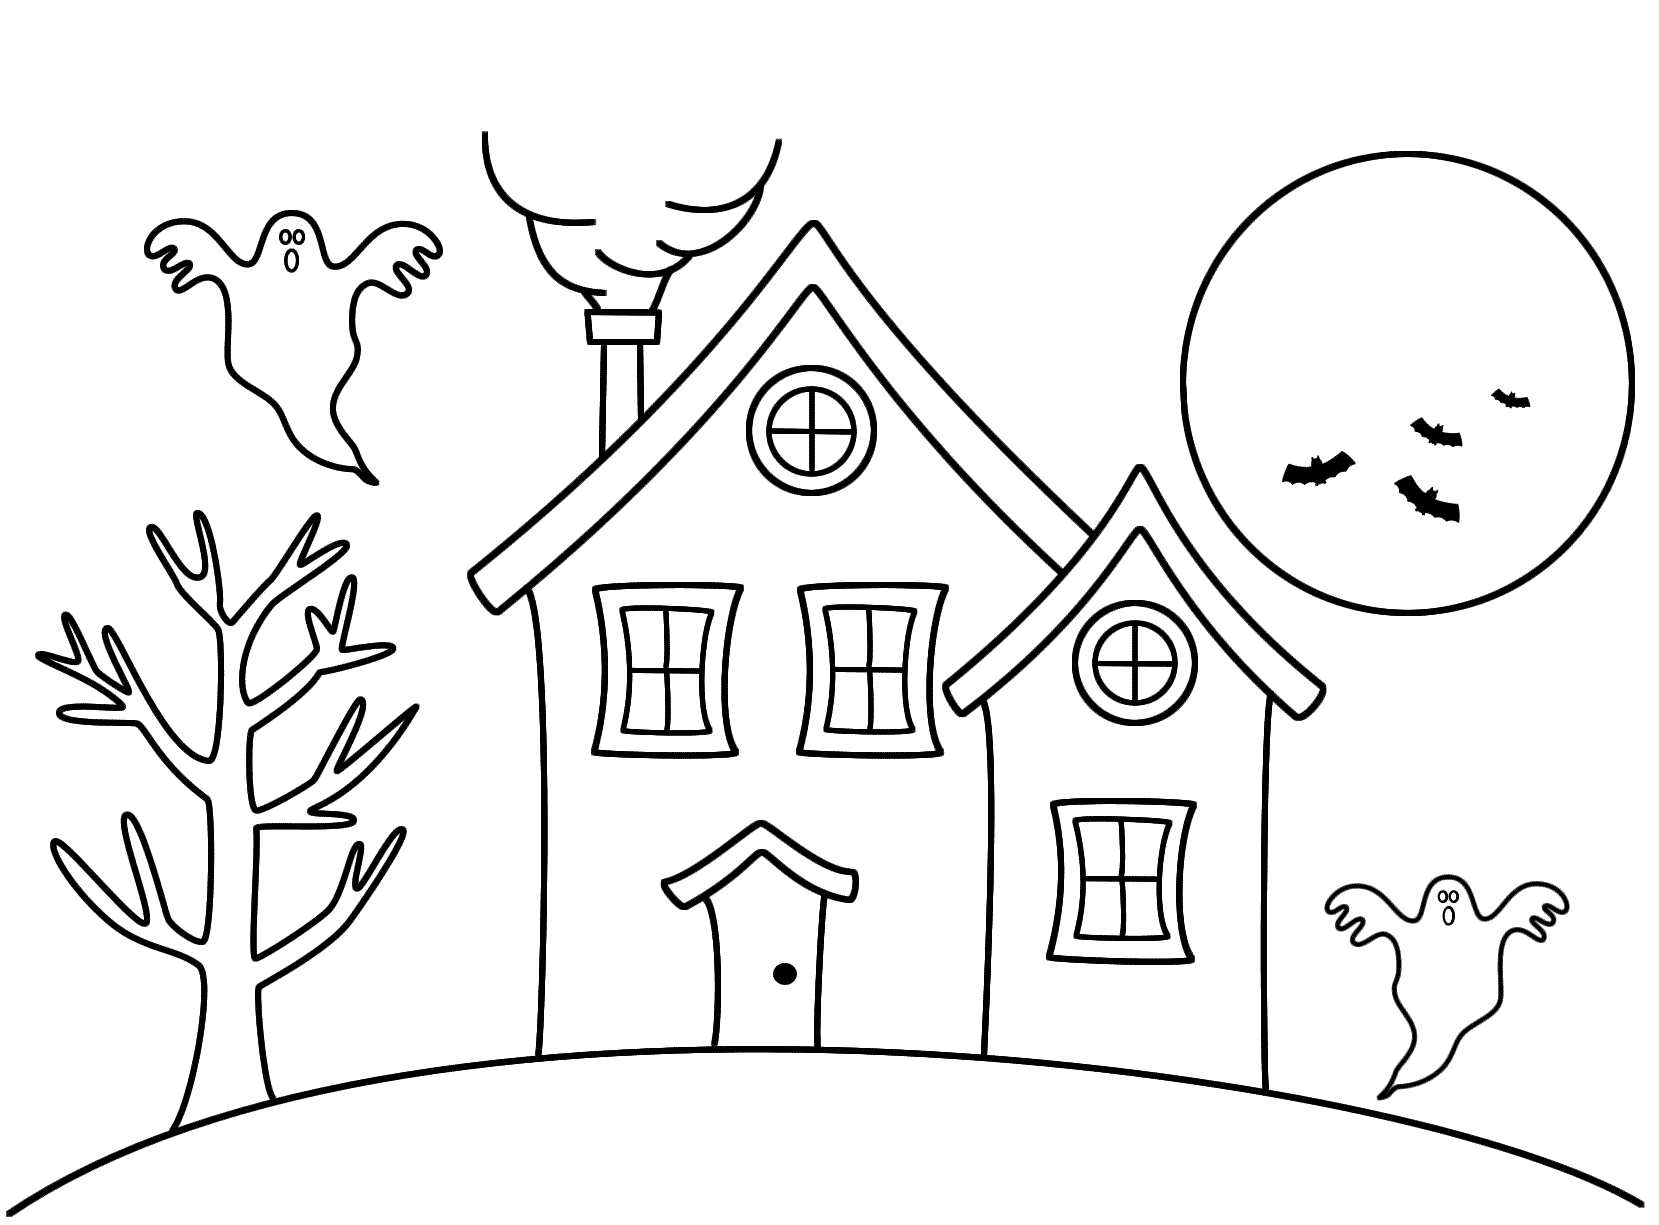 Haunted House - Coloring Page (Halloween)